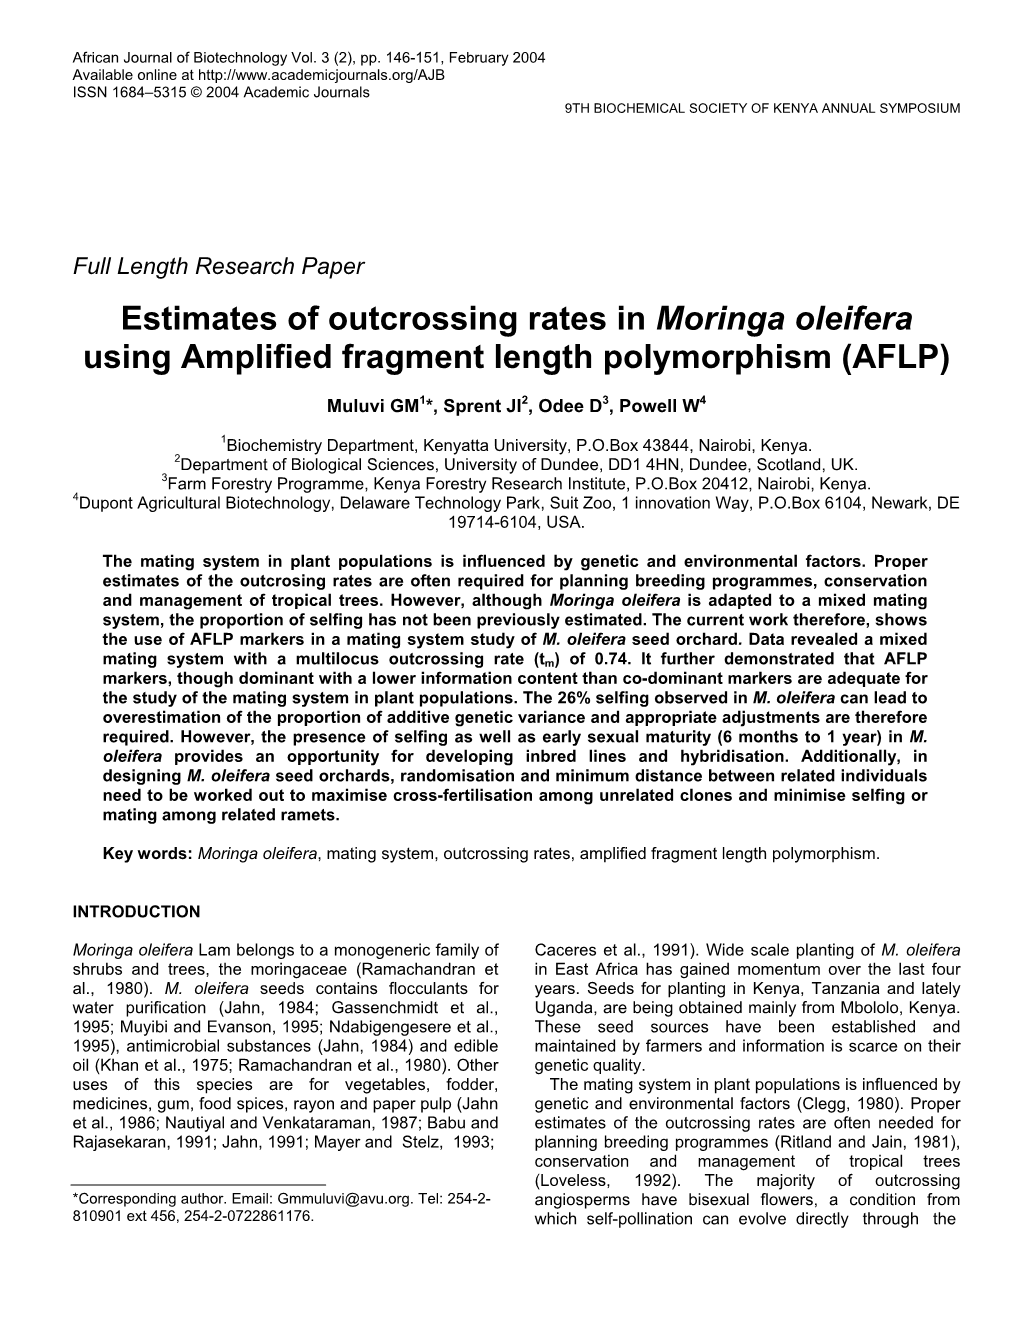 Estimates of Outcrossing Rates in Moringa Oleifera Using Amplified Fragment Length Polymorphism (AFLP)